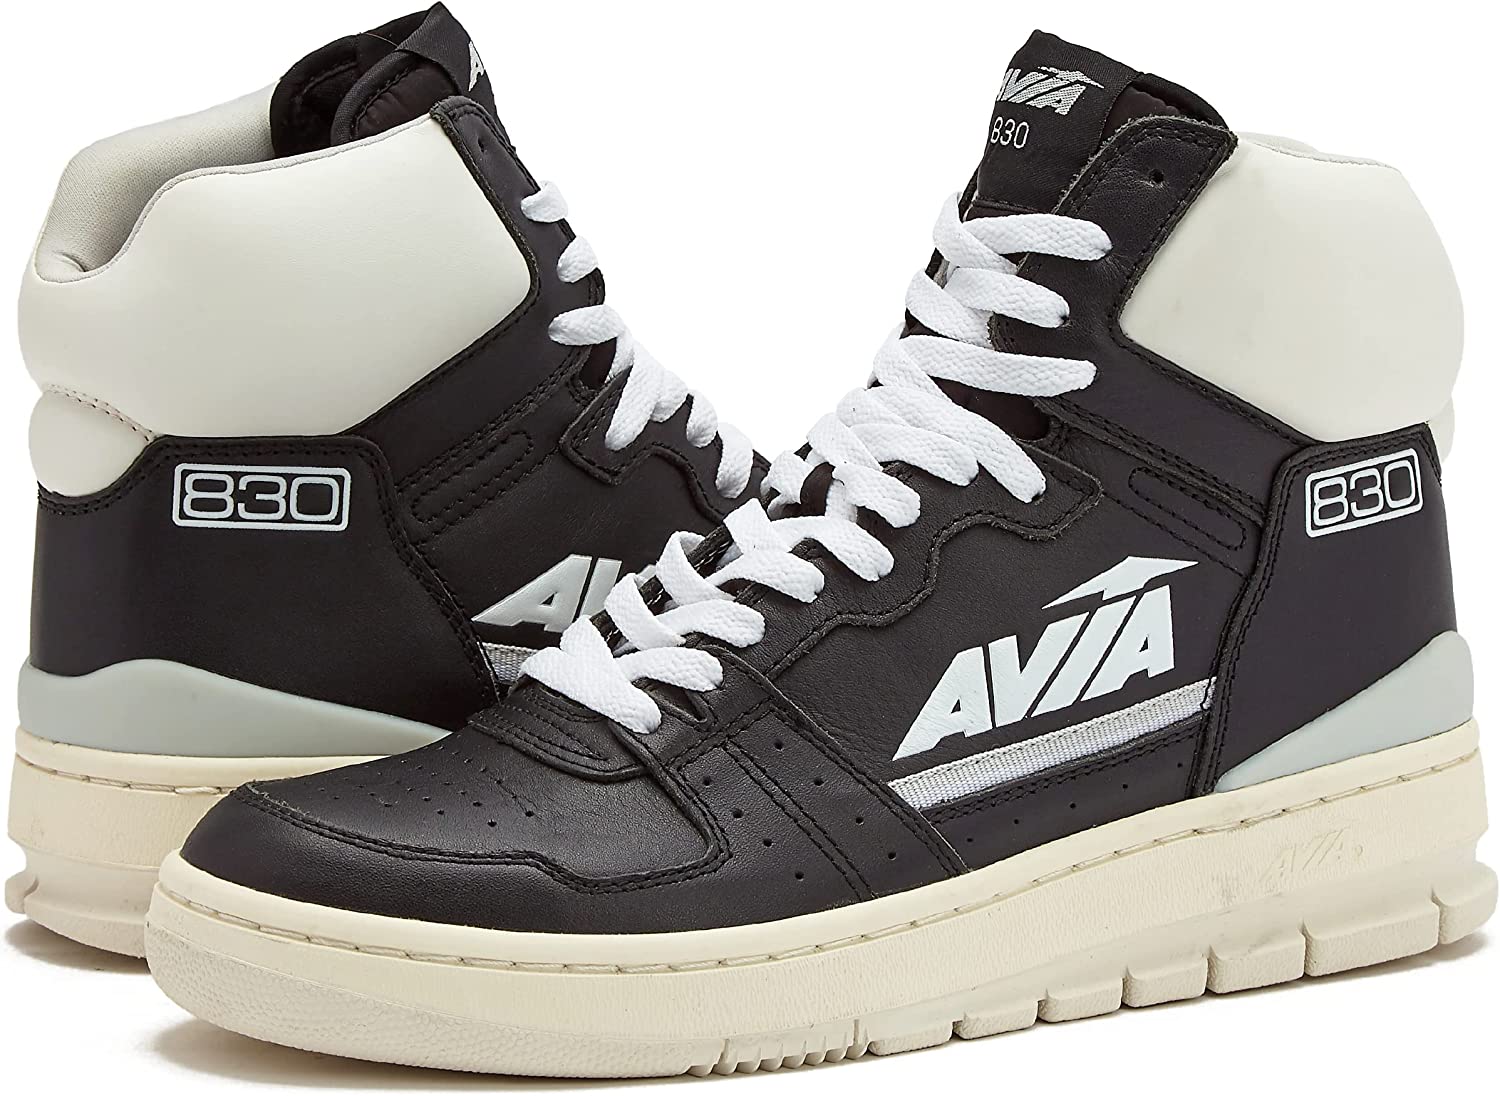 Avia 830 Men's Basketball Shoes, Retro Sneakers for Indoor or